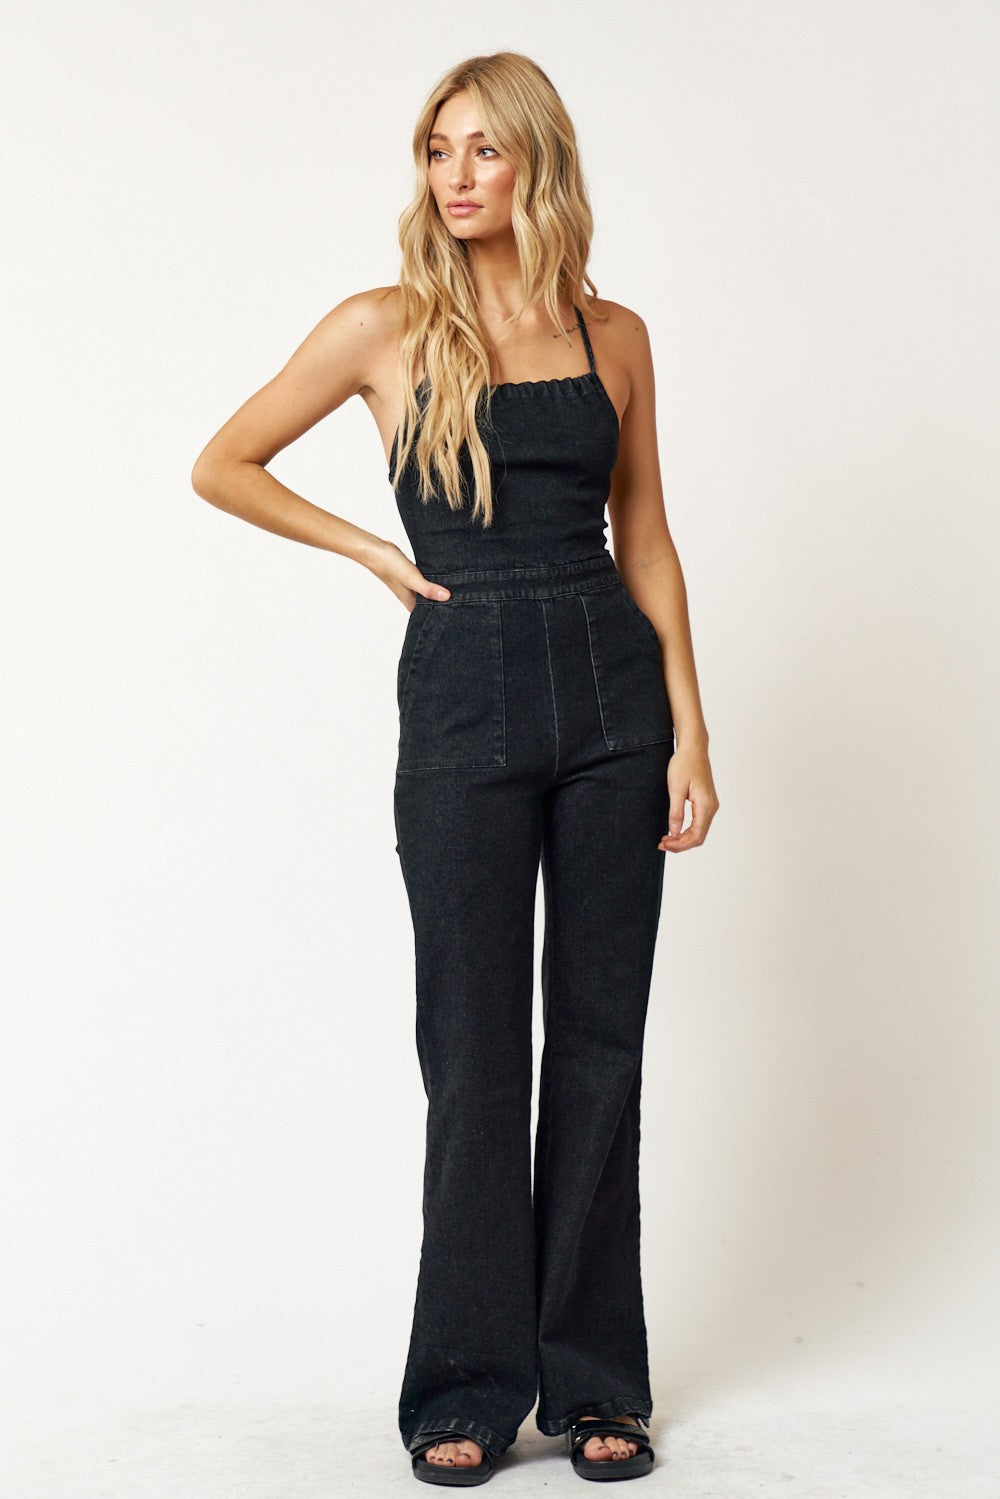 Blue Blush Denim Lace-Up Open Back Jumpsuit: Denim bell-bottom jumpsuit with side pockets and a sexy lace-up open back. A fusion of comfort and allure for a bold statement at any occasion. Chic and playful design, a must-have for a versatile wardrobe.